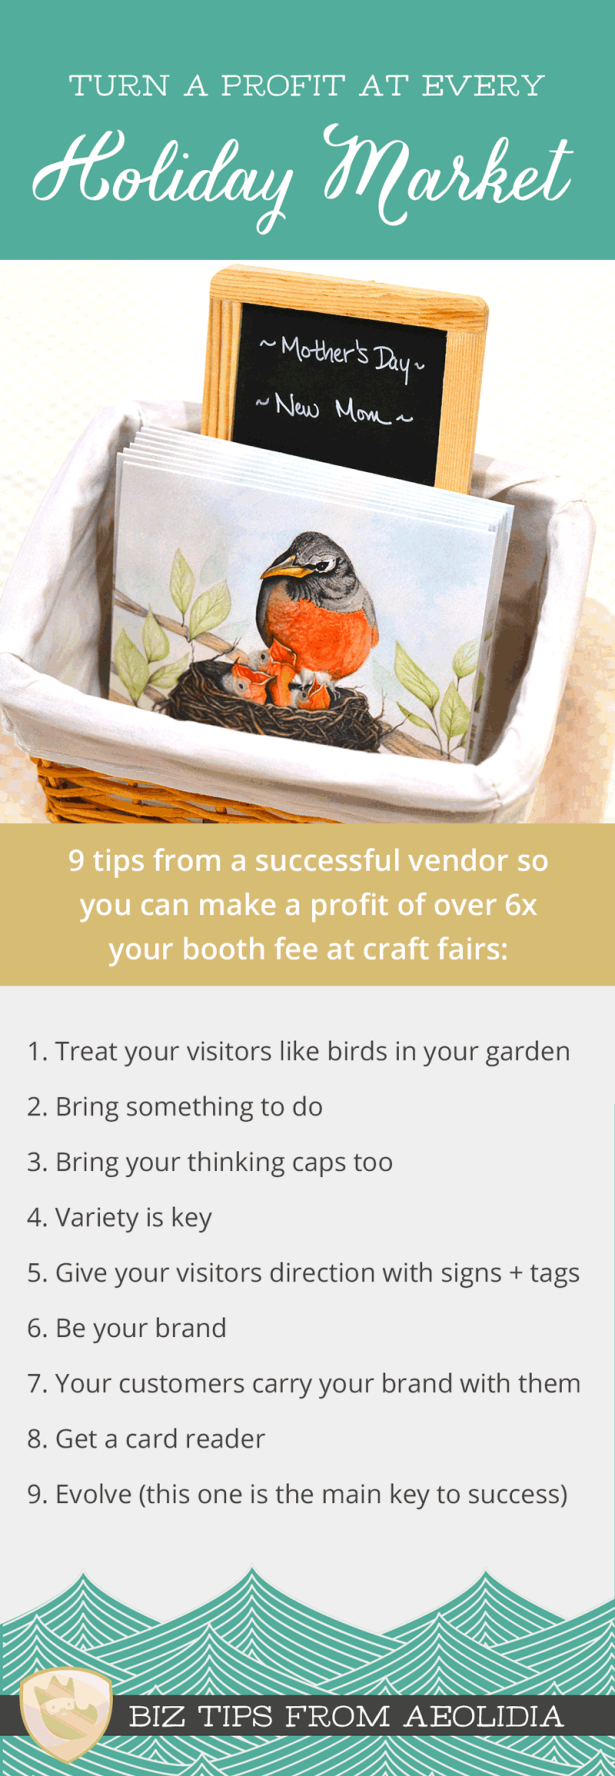 9 tips for making money at craft fairs and holiday markets on the Aeolidia blog.